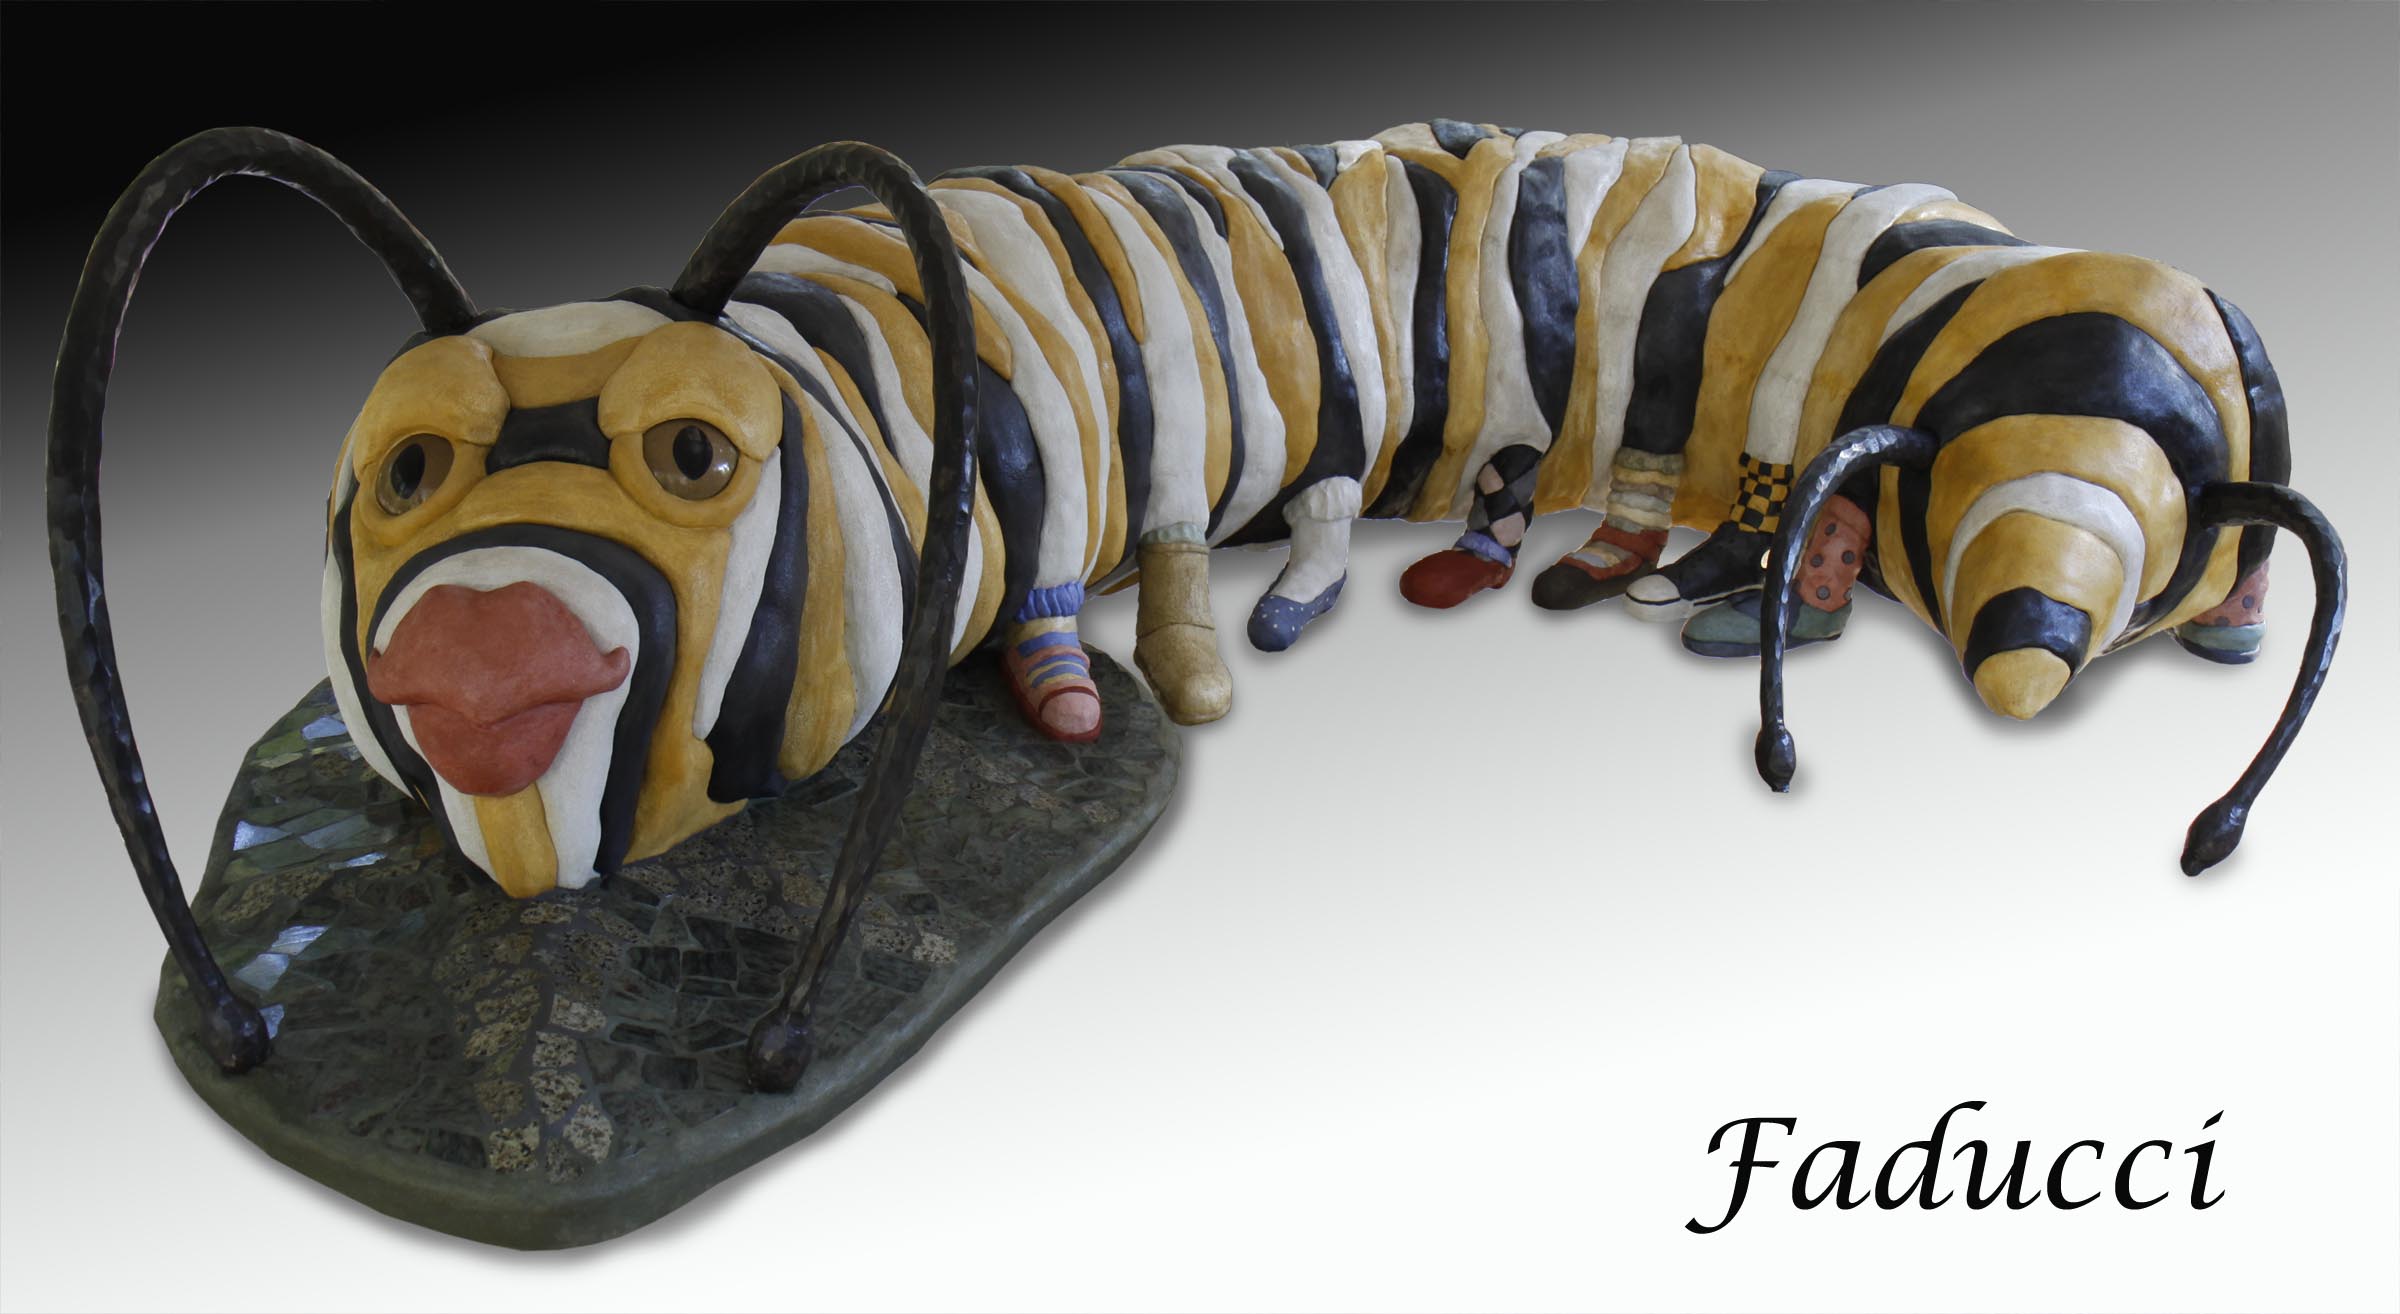 Caterpillar sculpture coming soon! Help give it a name!